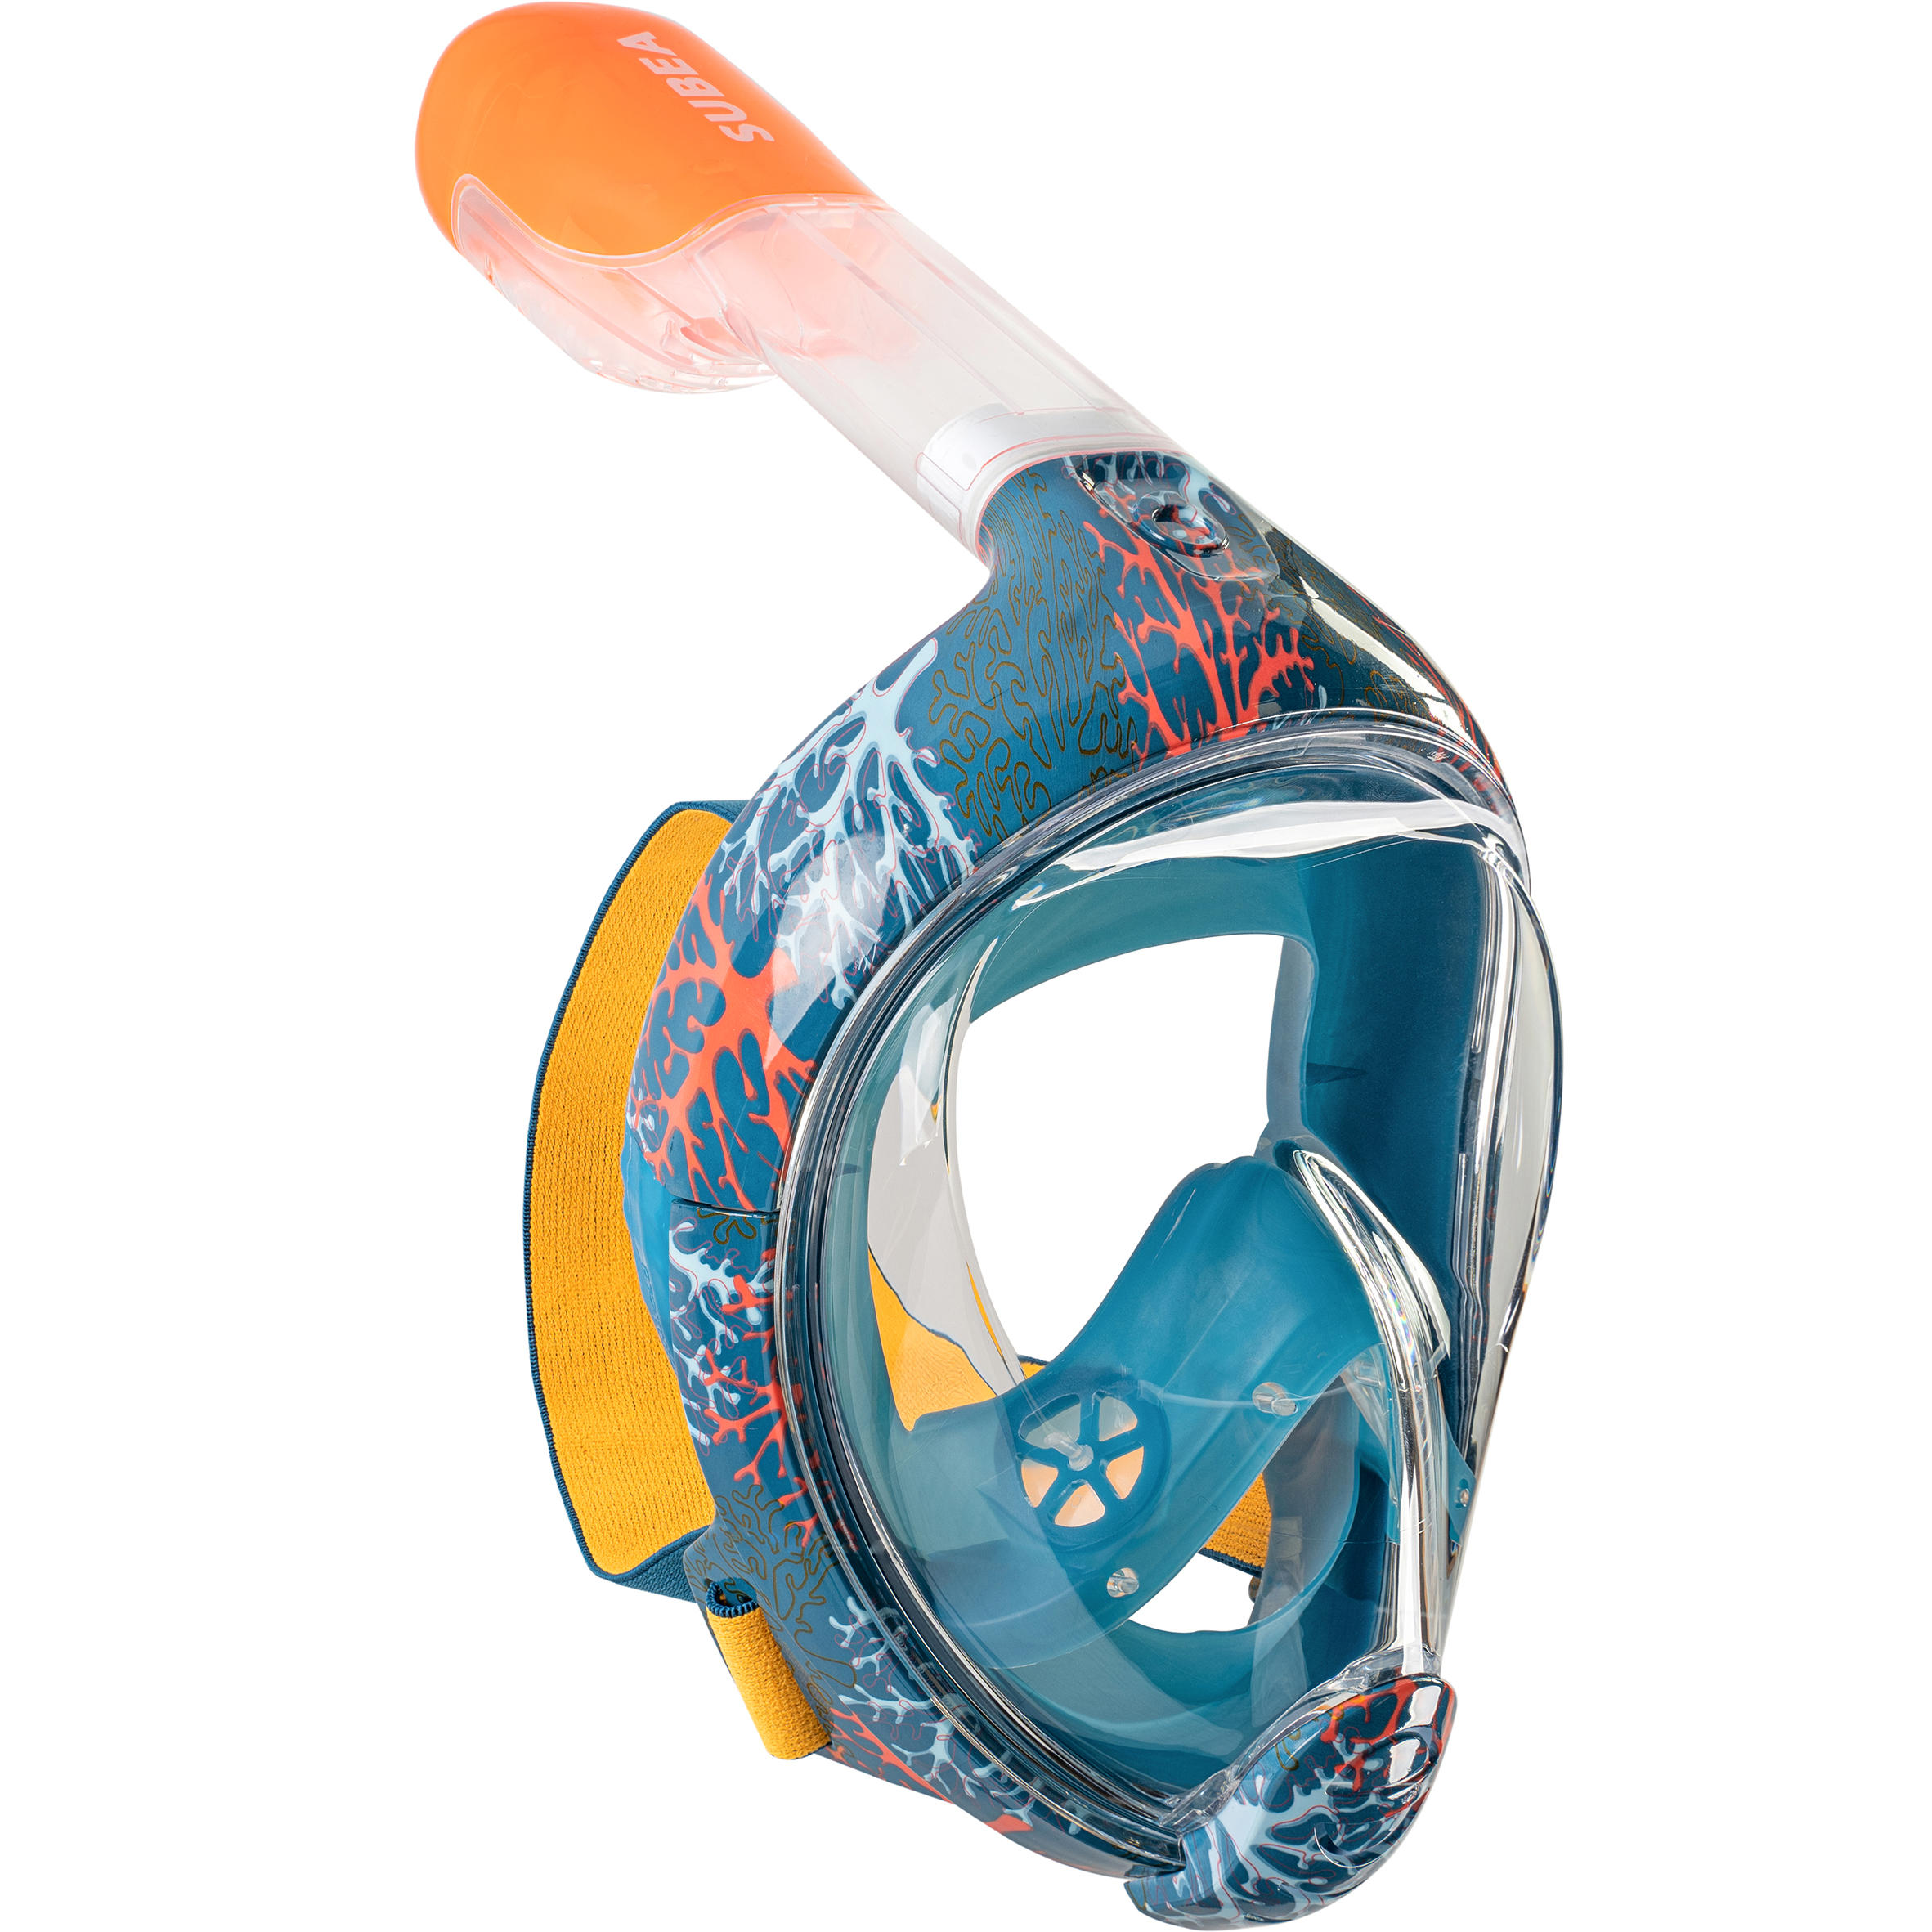 SUBEA Kids Easybreath Surface Mask XS (6-10 years) - Coral Blue